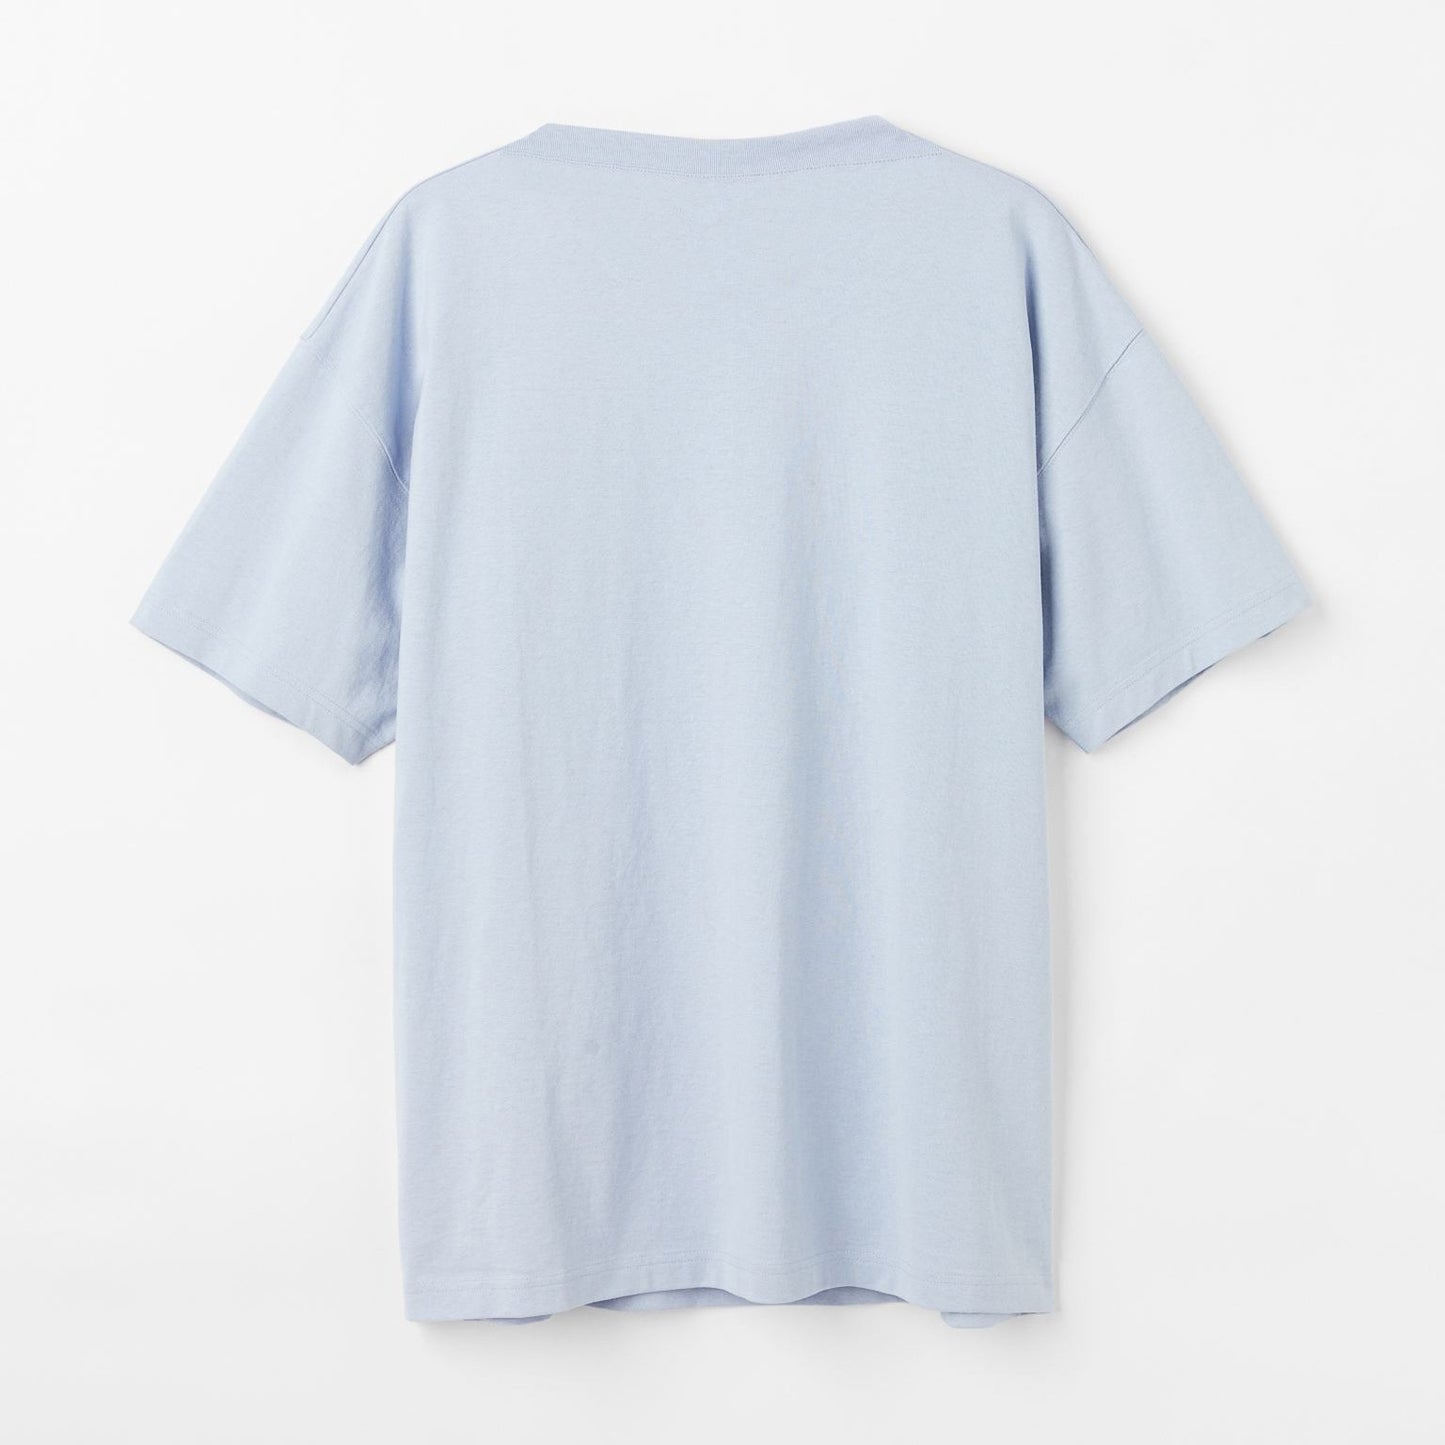 Lucky Me Printed Oversized Baby Blue Cotton T-shirt